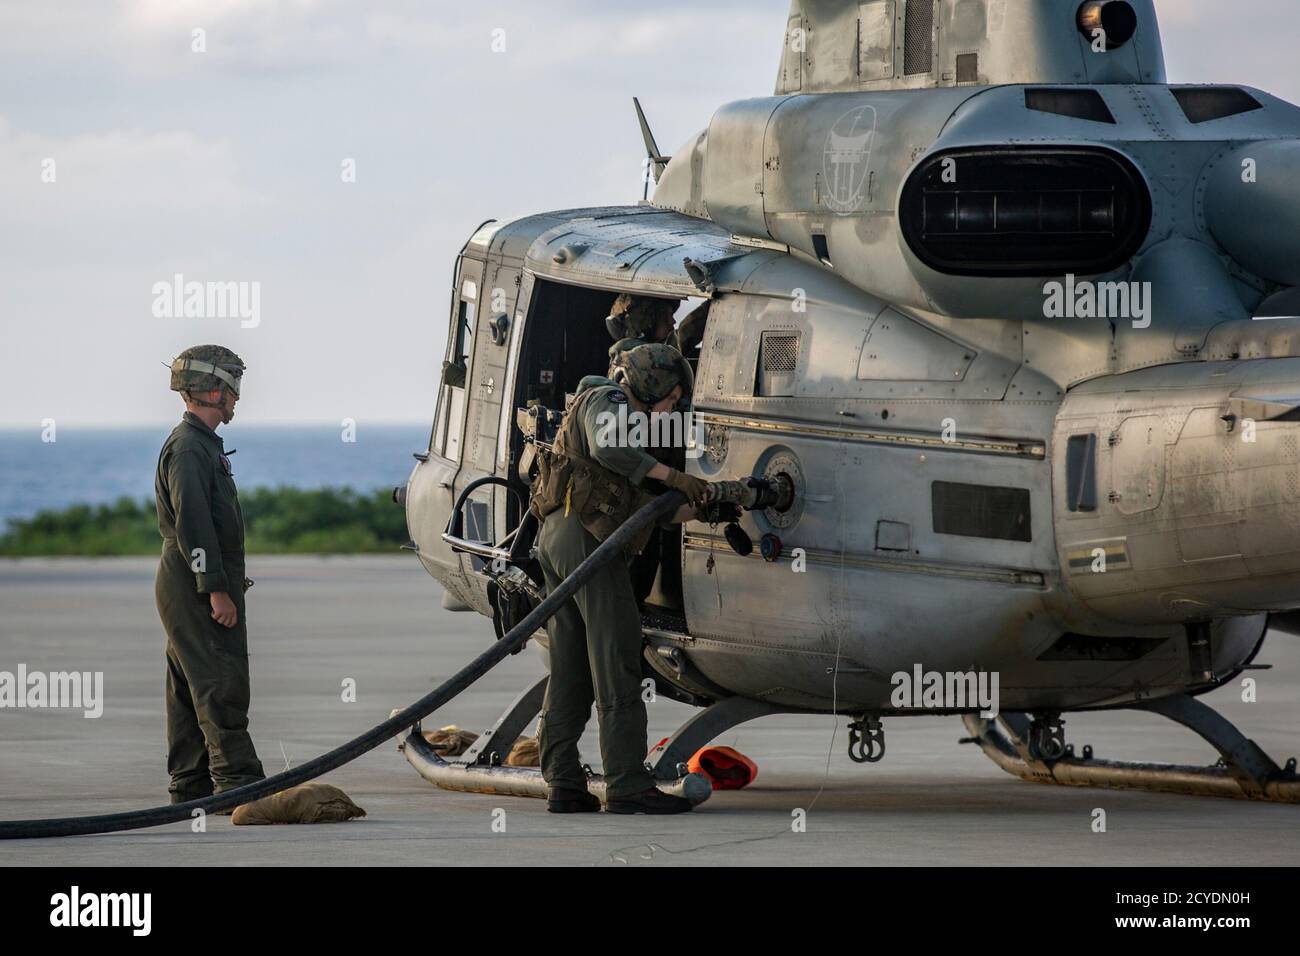 U.S. Marines with Marine Light Attack Helicopter Squadron (HMLA) 469 and 9th Engineer Support Battalion (ESB) refuel a UH-1Y Venom helicopter as part of a forward arming and refueling point (FARP) at Ie Shima, Okinawa, Japan, Sept. 24, 2020. HMLA-469 conducted the FARP training to increase their familiarity and coordination with refueling and re-arming while operating in forward locations; The training was executed in cooperation with 9th ESB, 3rd Transportation Support Battalion (TSB) and Combat Logistics Regiment (CLR) 3. (U.S. Marine Corps photo by Cpl. Ethan M. LeBlanc) Stock Photo